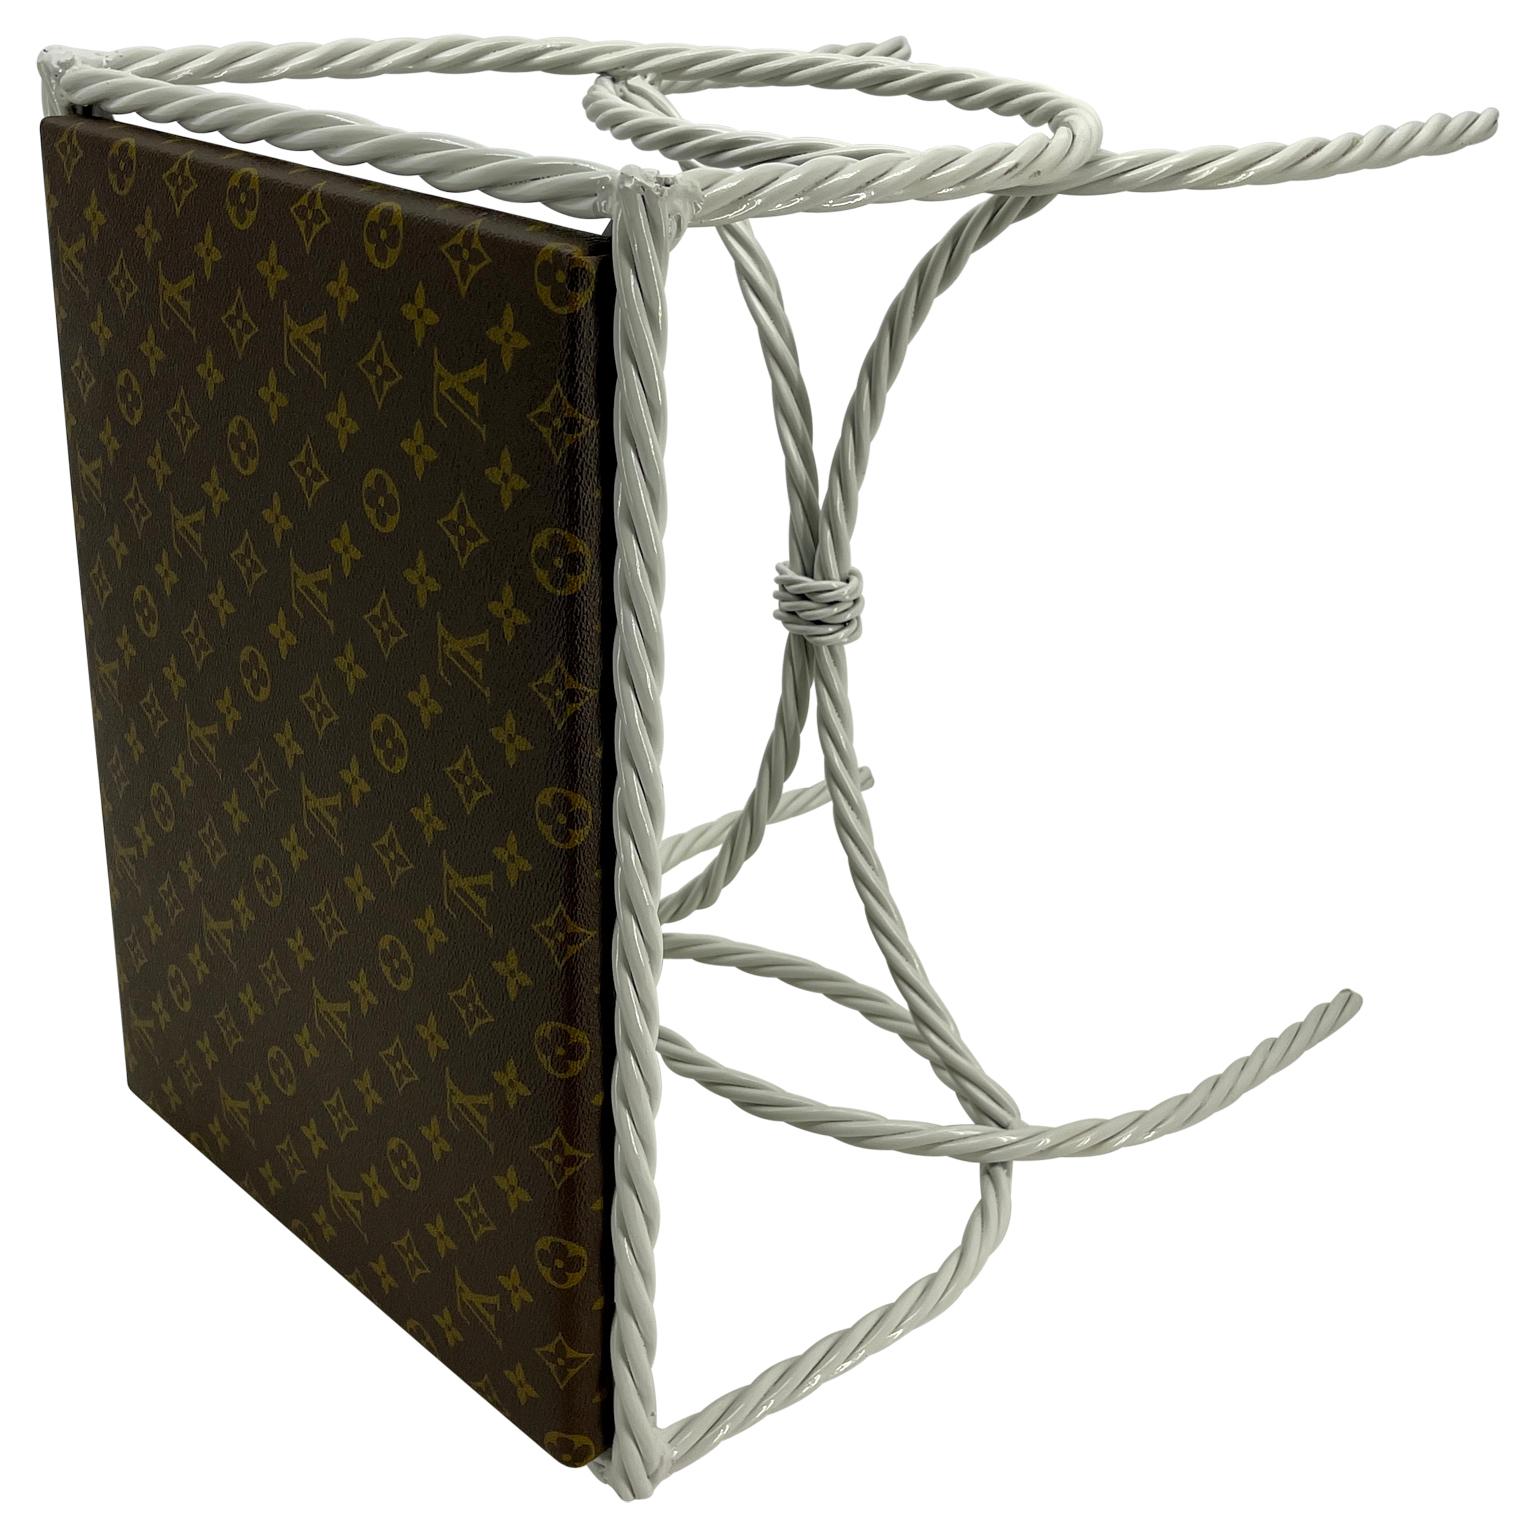 Pair of Roped Iron Benches Side Tables with Louis Vuitton Monogram Fabric For Sale 6